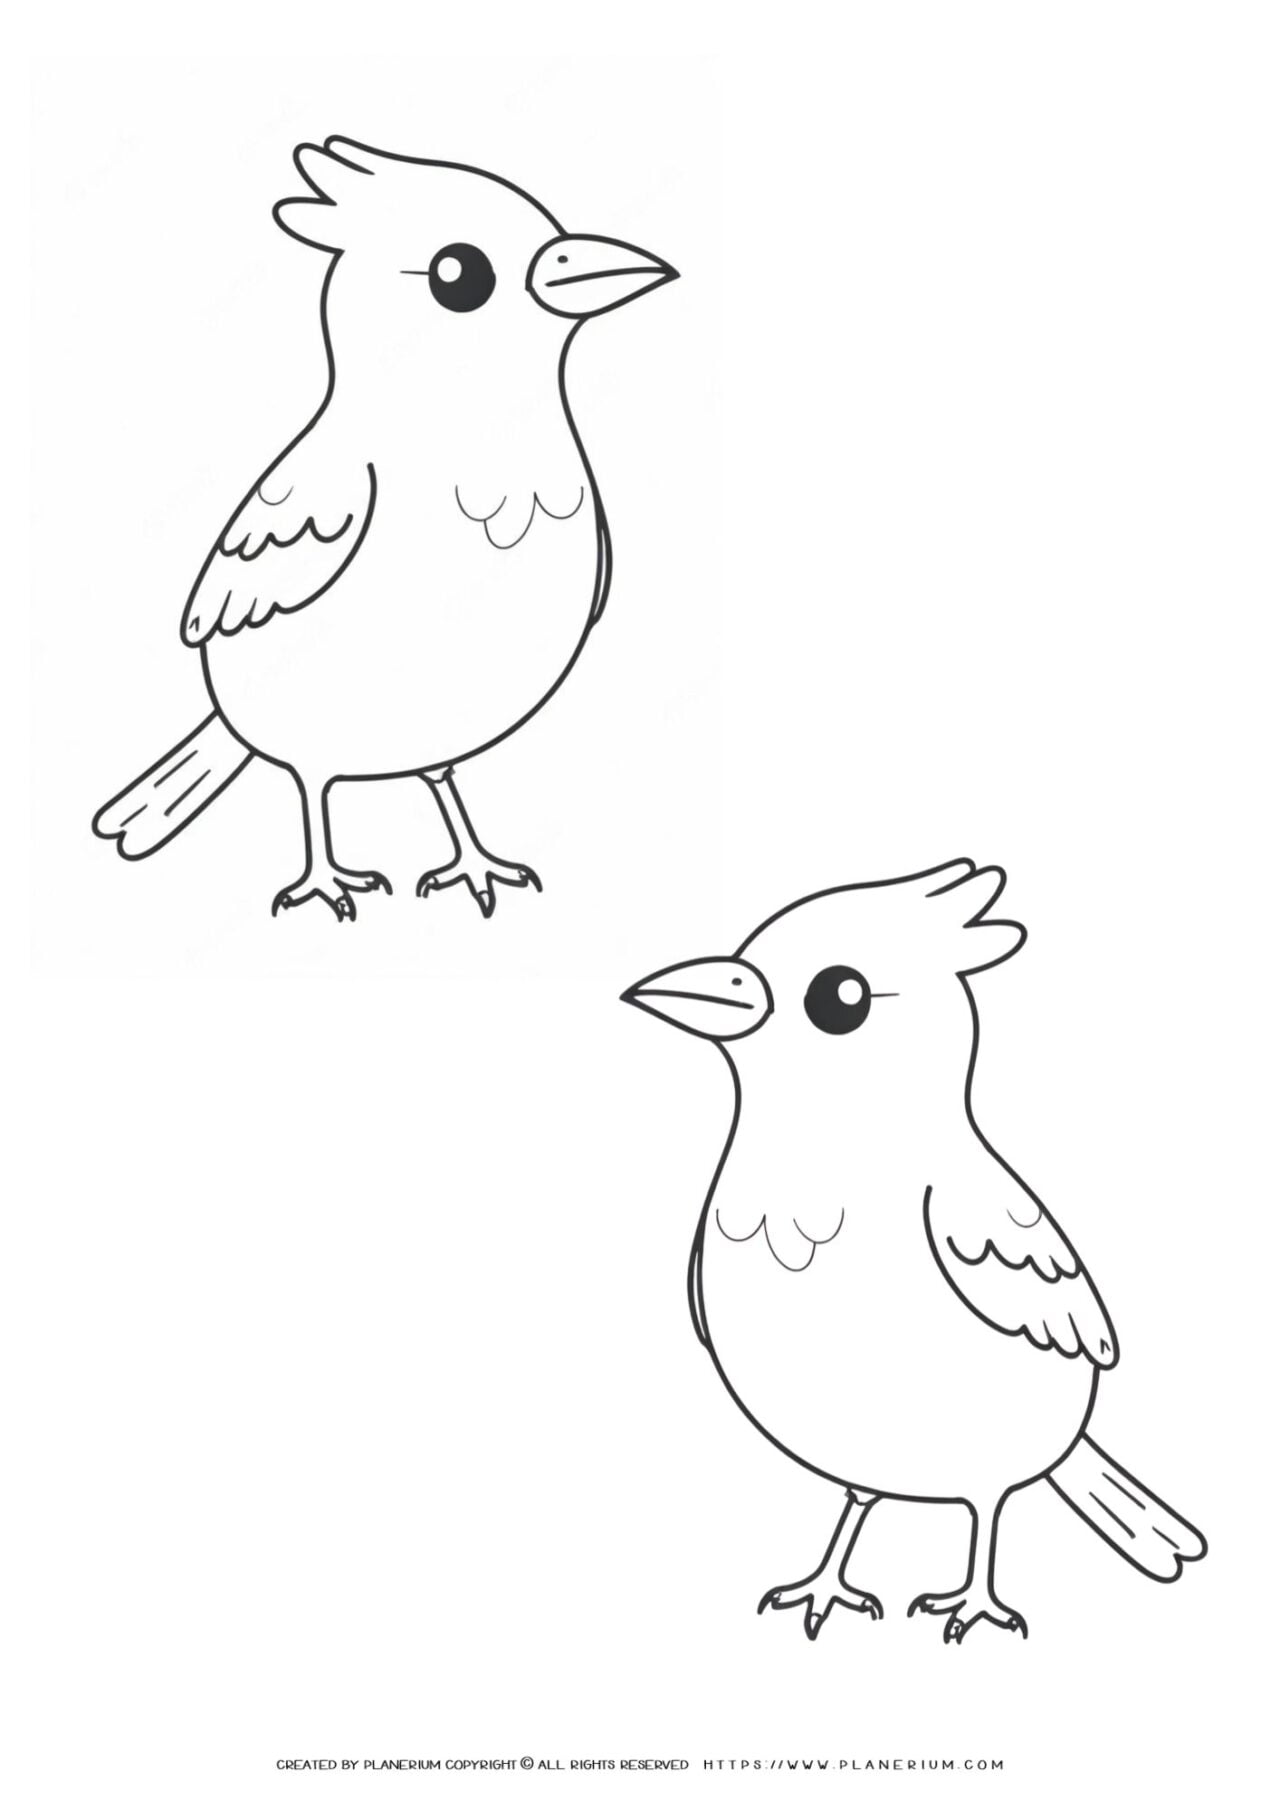 Line drawing of two cartoon birds.